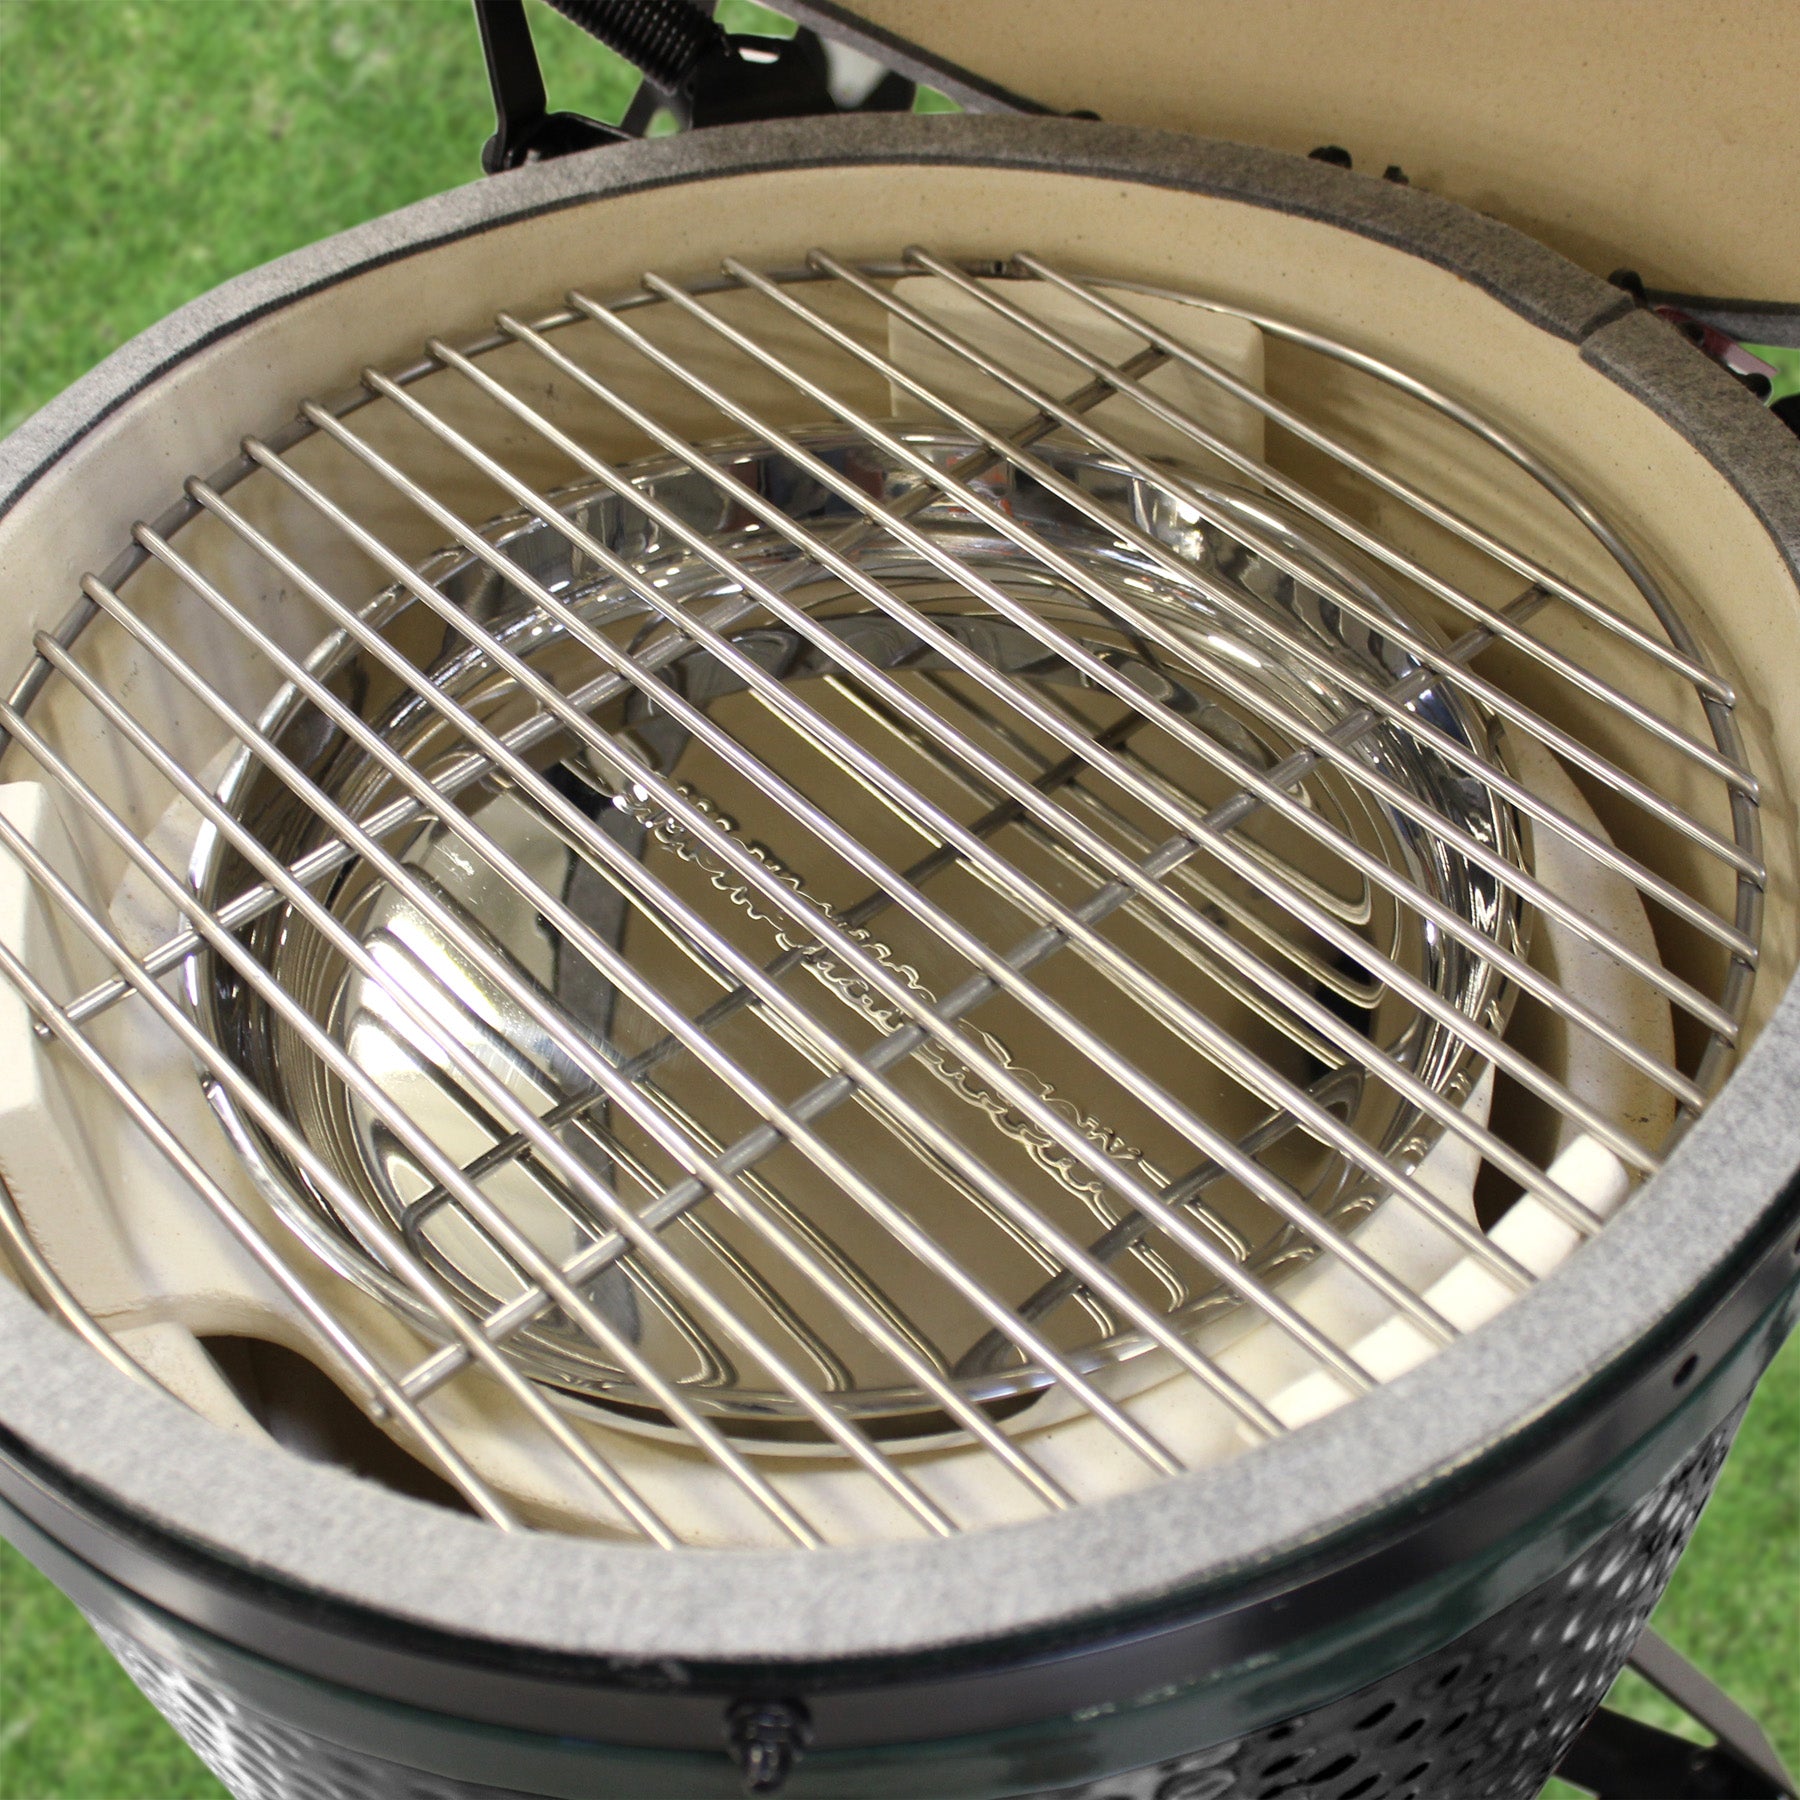 Can I Put A Stainless Steel Pan On The Grill? And What Types of